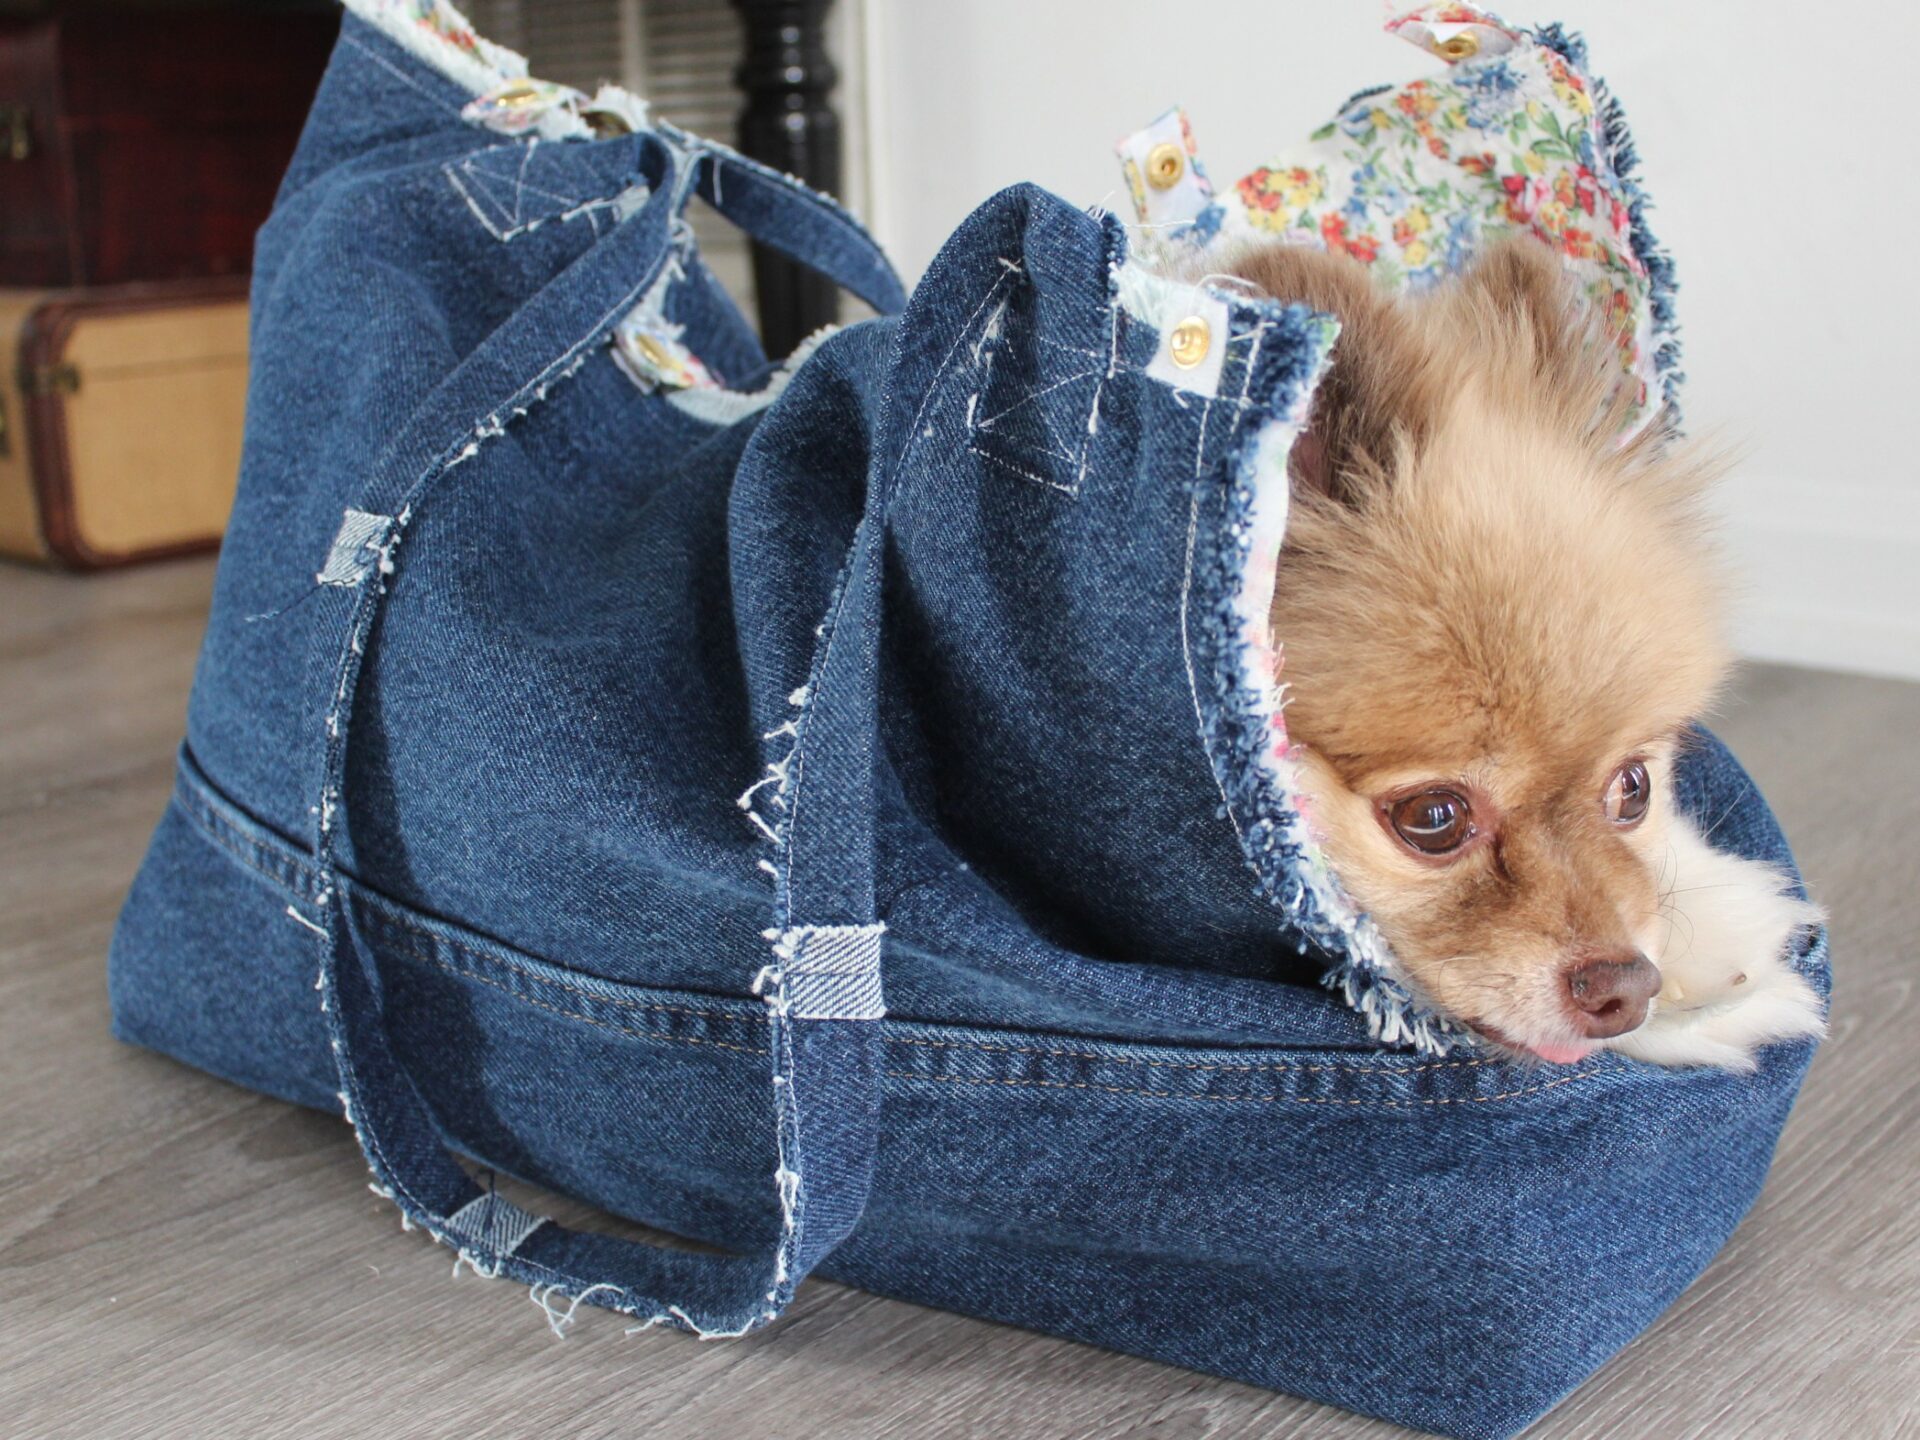 A dog is laying in the bag of jeans